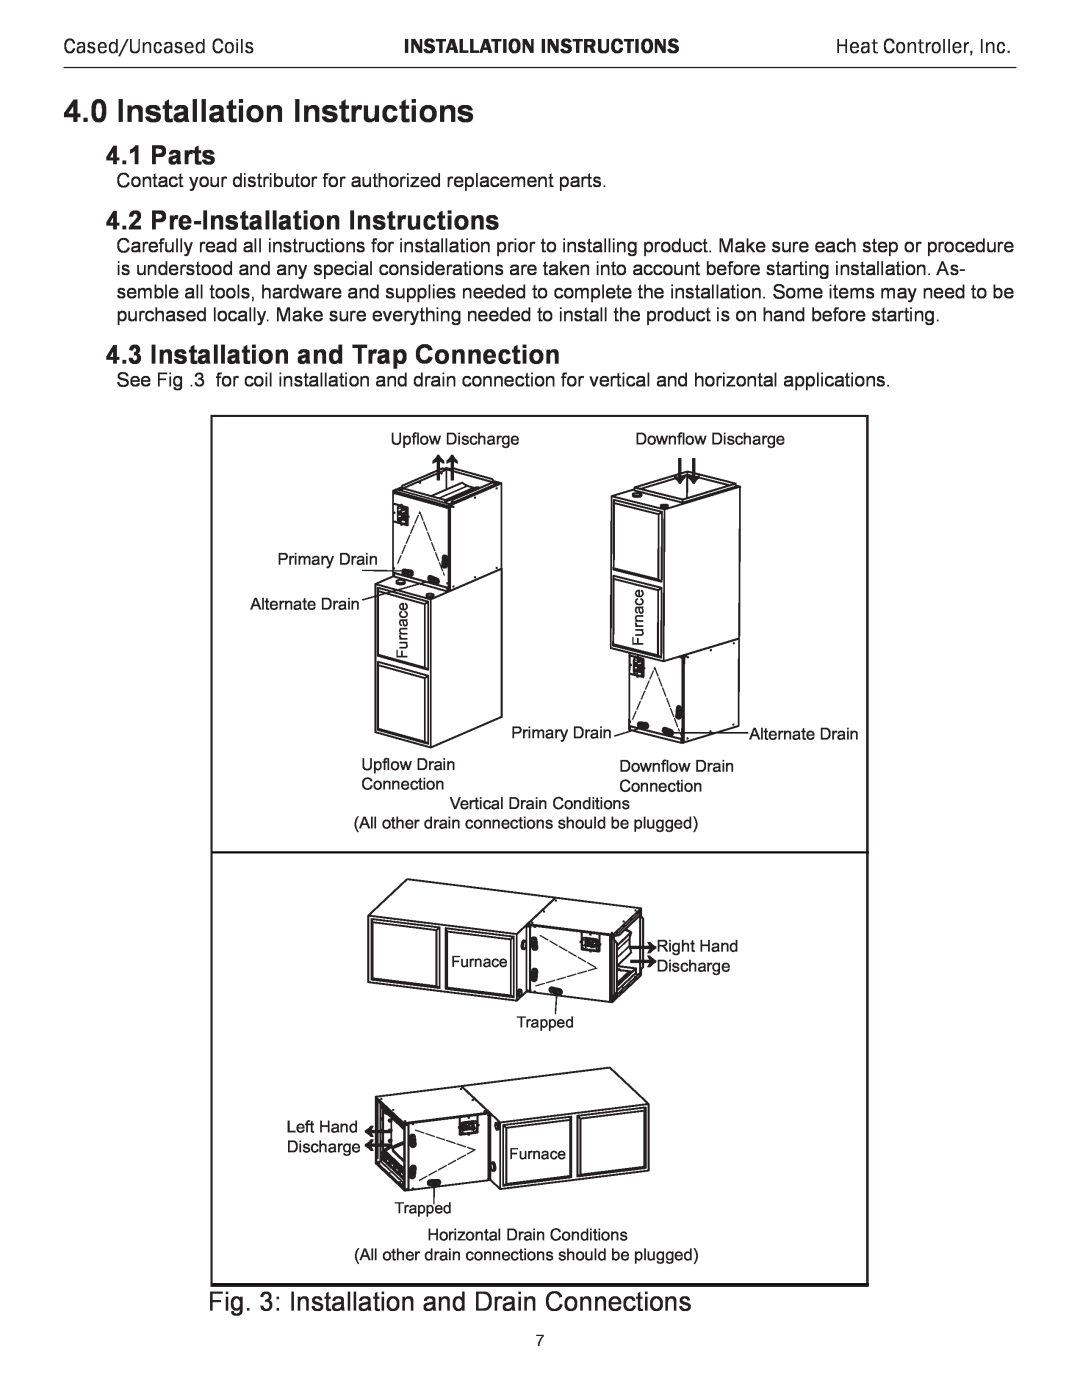 Heat Controller RSG30R-1D 4.0Installation Instructions, 4.1Parts, Pre-InstallationInstructions, Cased/Uncased Coils 